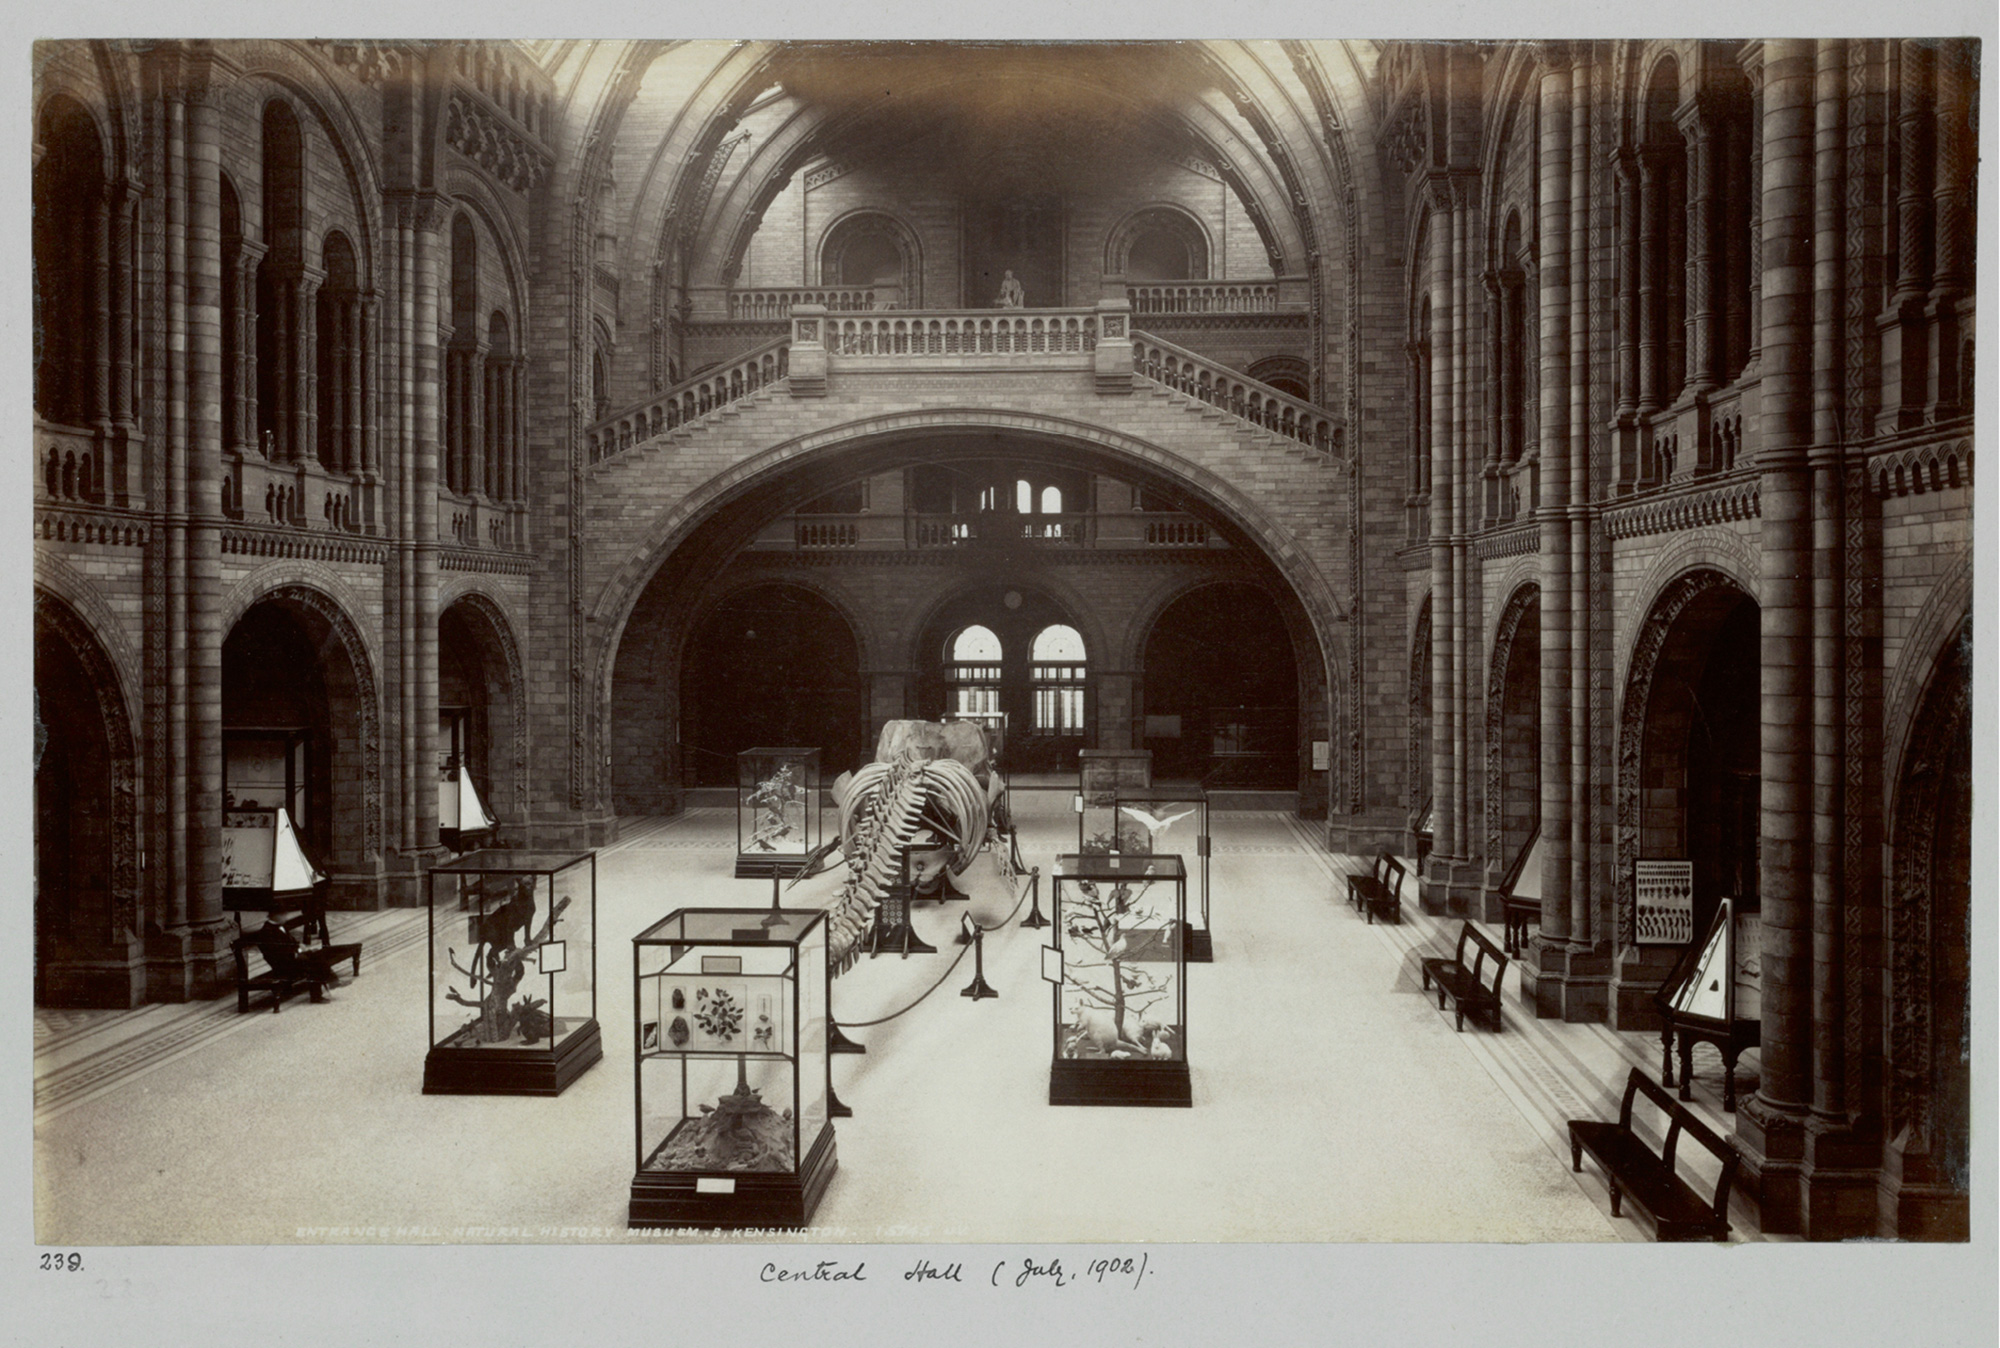 London’s Natural History Museum with the seven displays created by Henry Flower in place. All images courtesy the Natural History Museum.